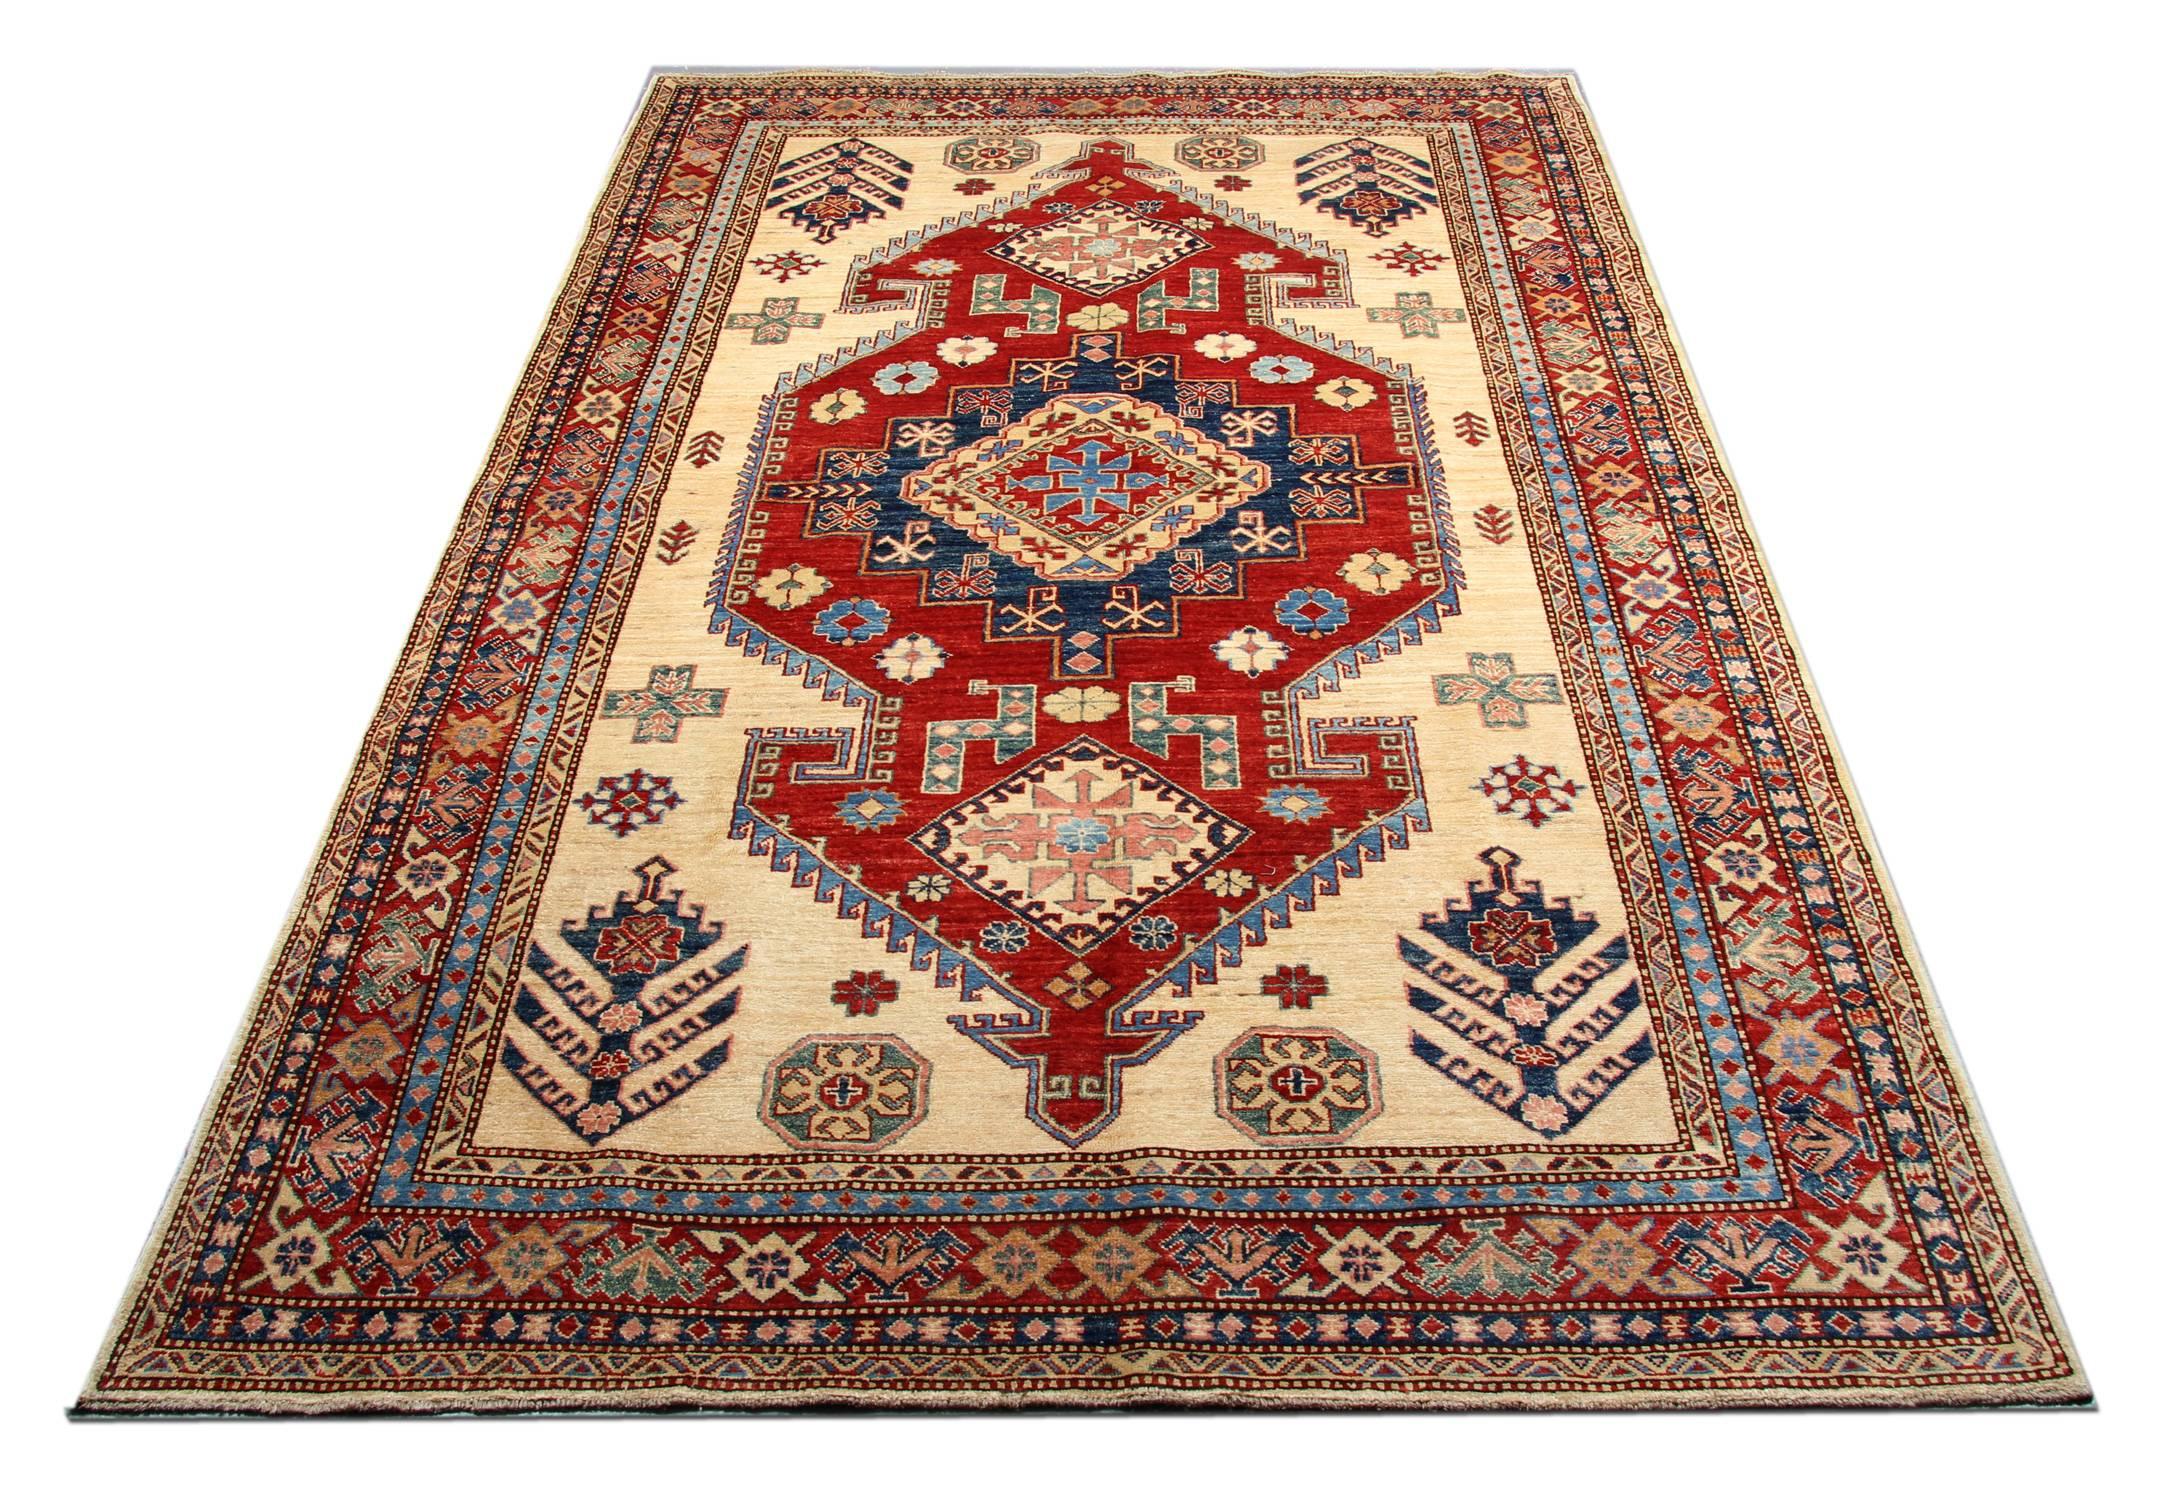 Oriental rug Handmade carpet is a traditional handwoven tribal rug with bold colours of cream, light blue and red featuring intricate geometric rug designs of stars and peacocks trees encompassing three medallions. This cream rug is handmade with